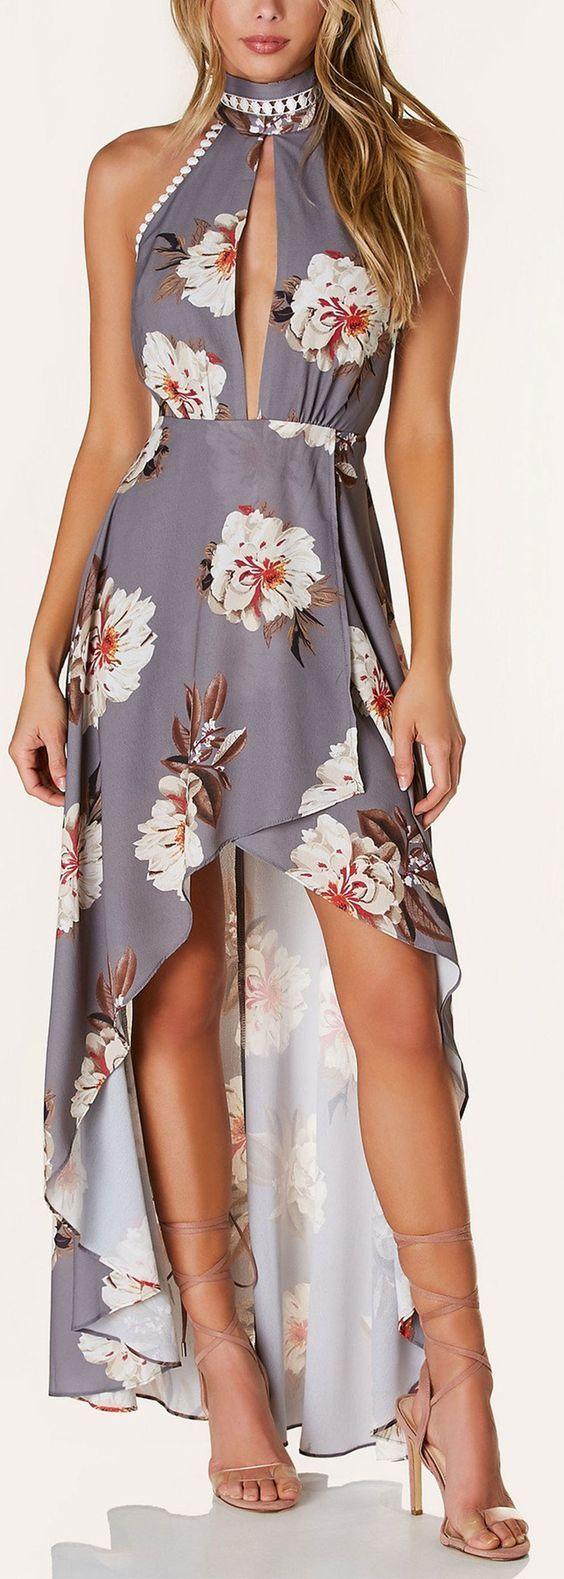 Mariage - Halter Backless Floral Printed High Low Dress - AZBRO.com